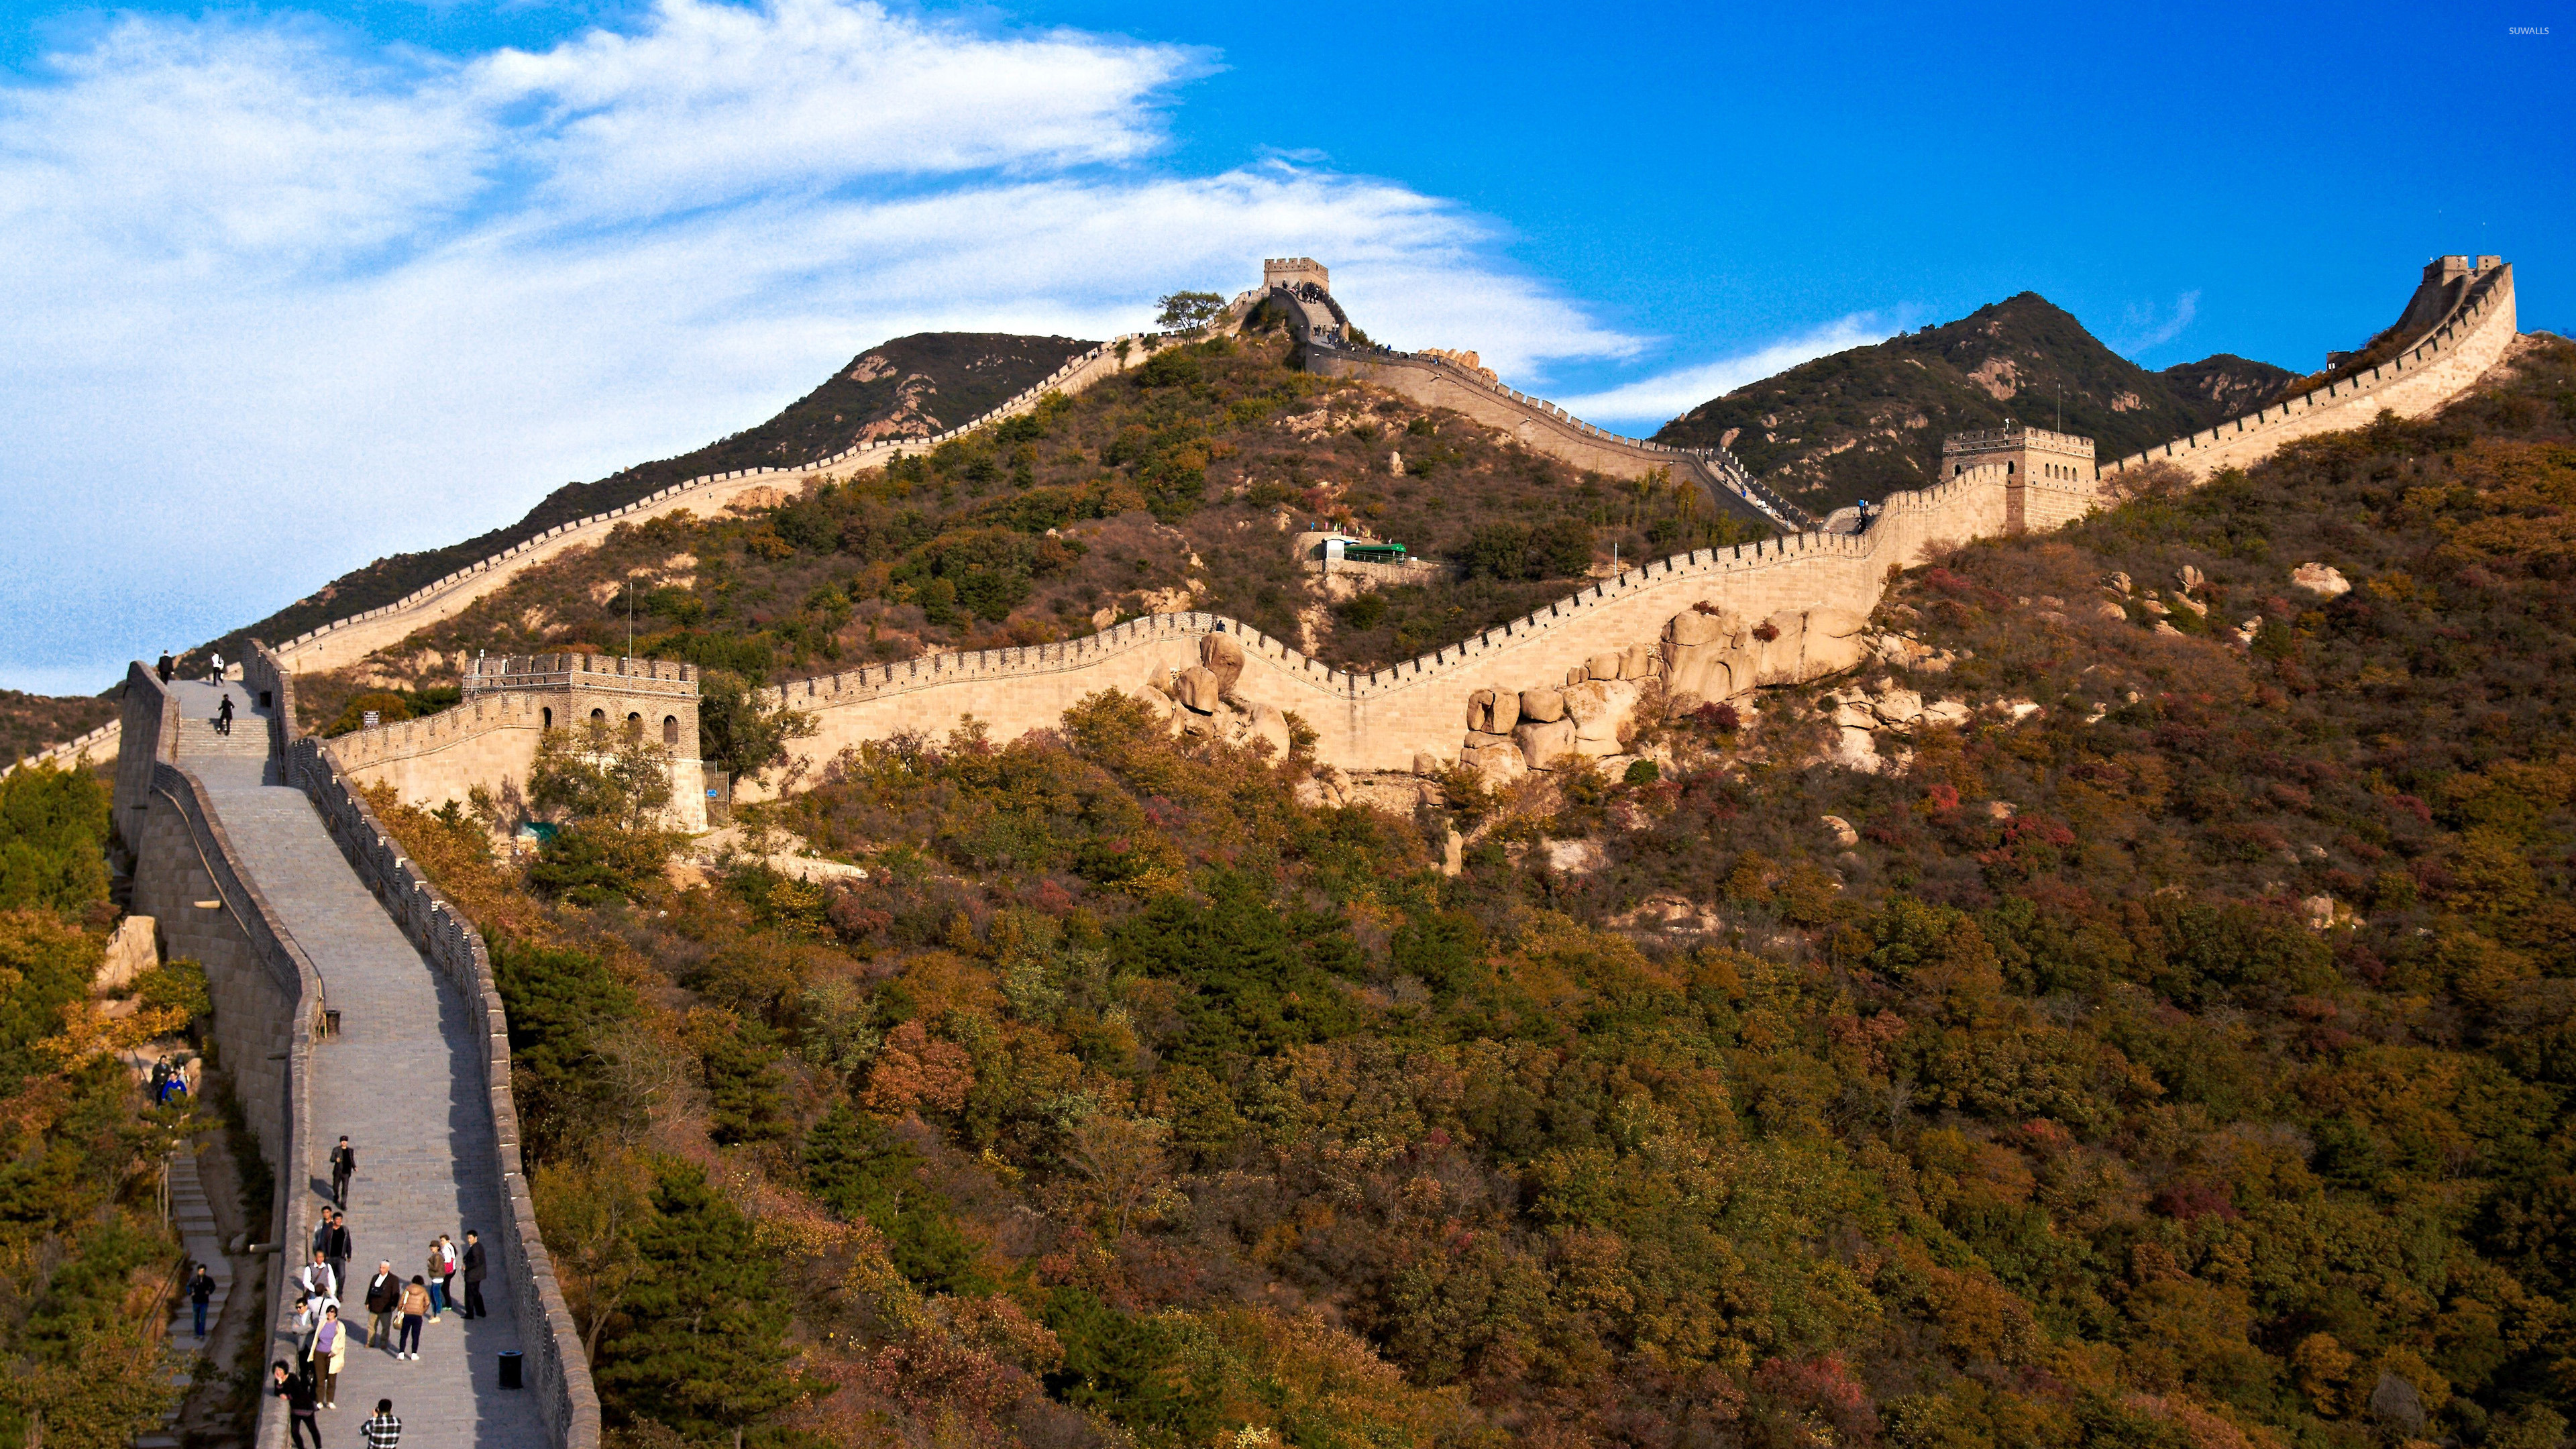 Great Wall of China: Several parts were built from as early as the 7th century BC. 3840x2160 4K Wallpaper.